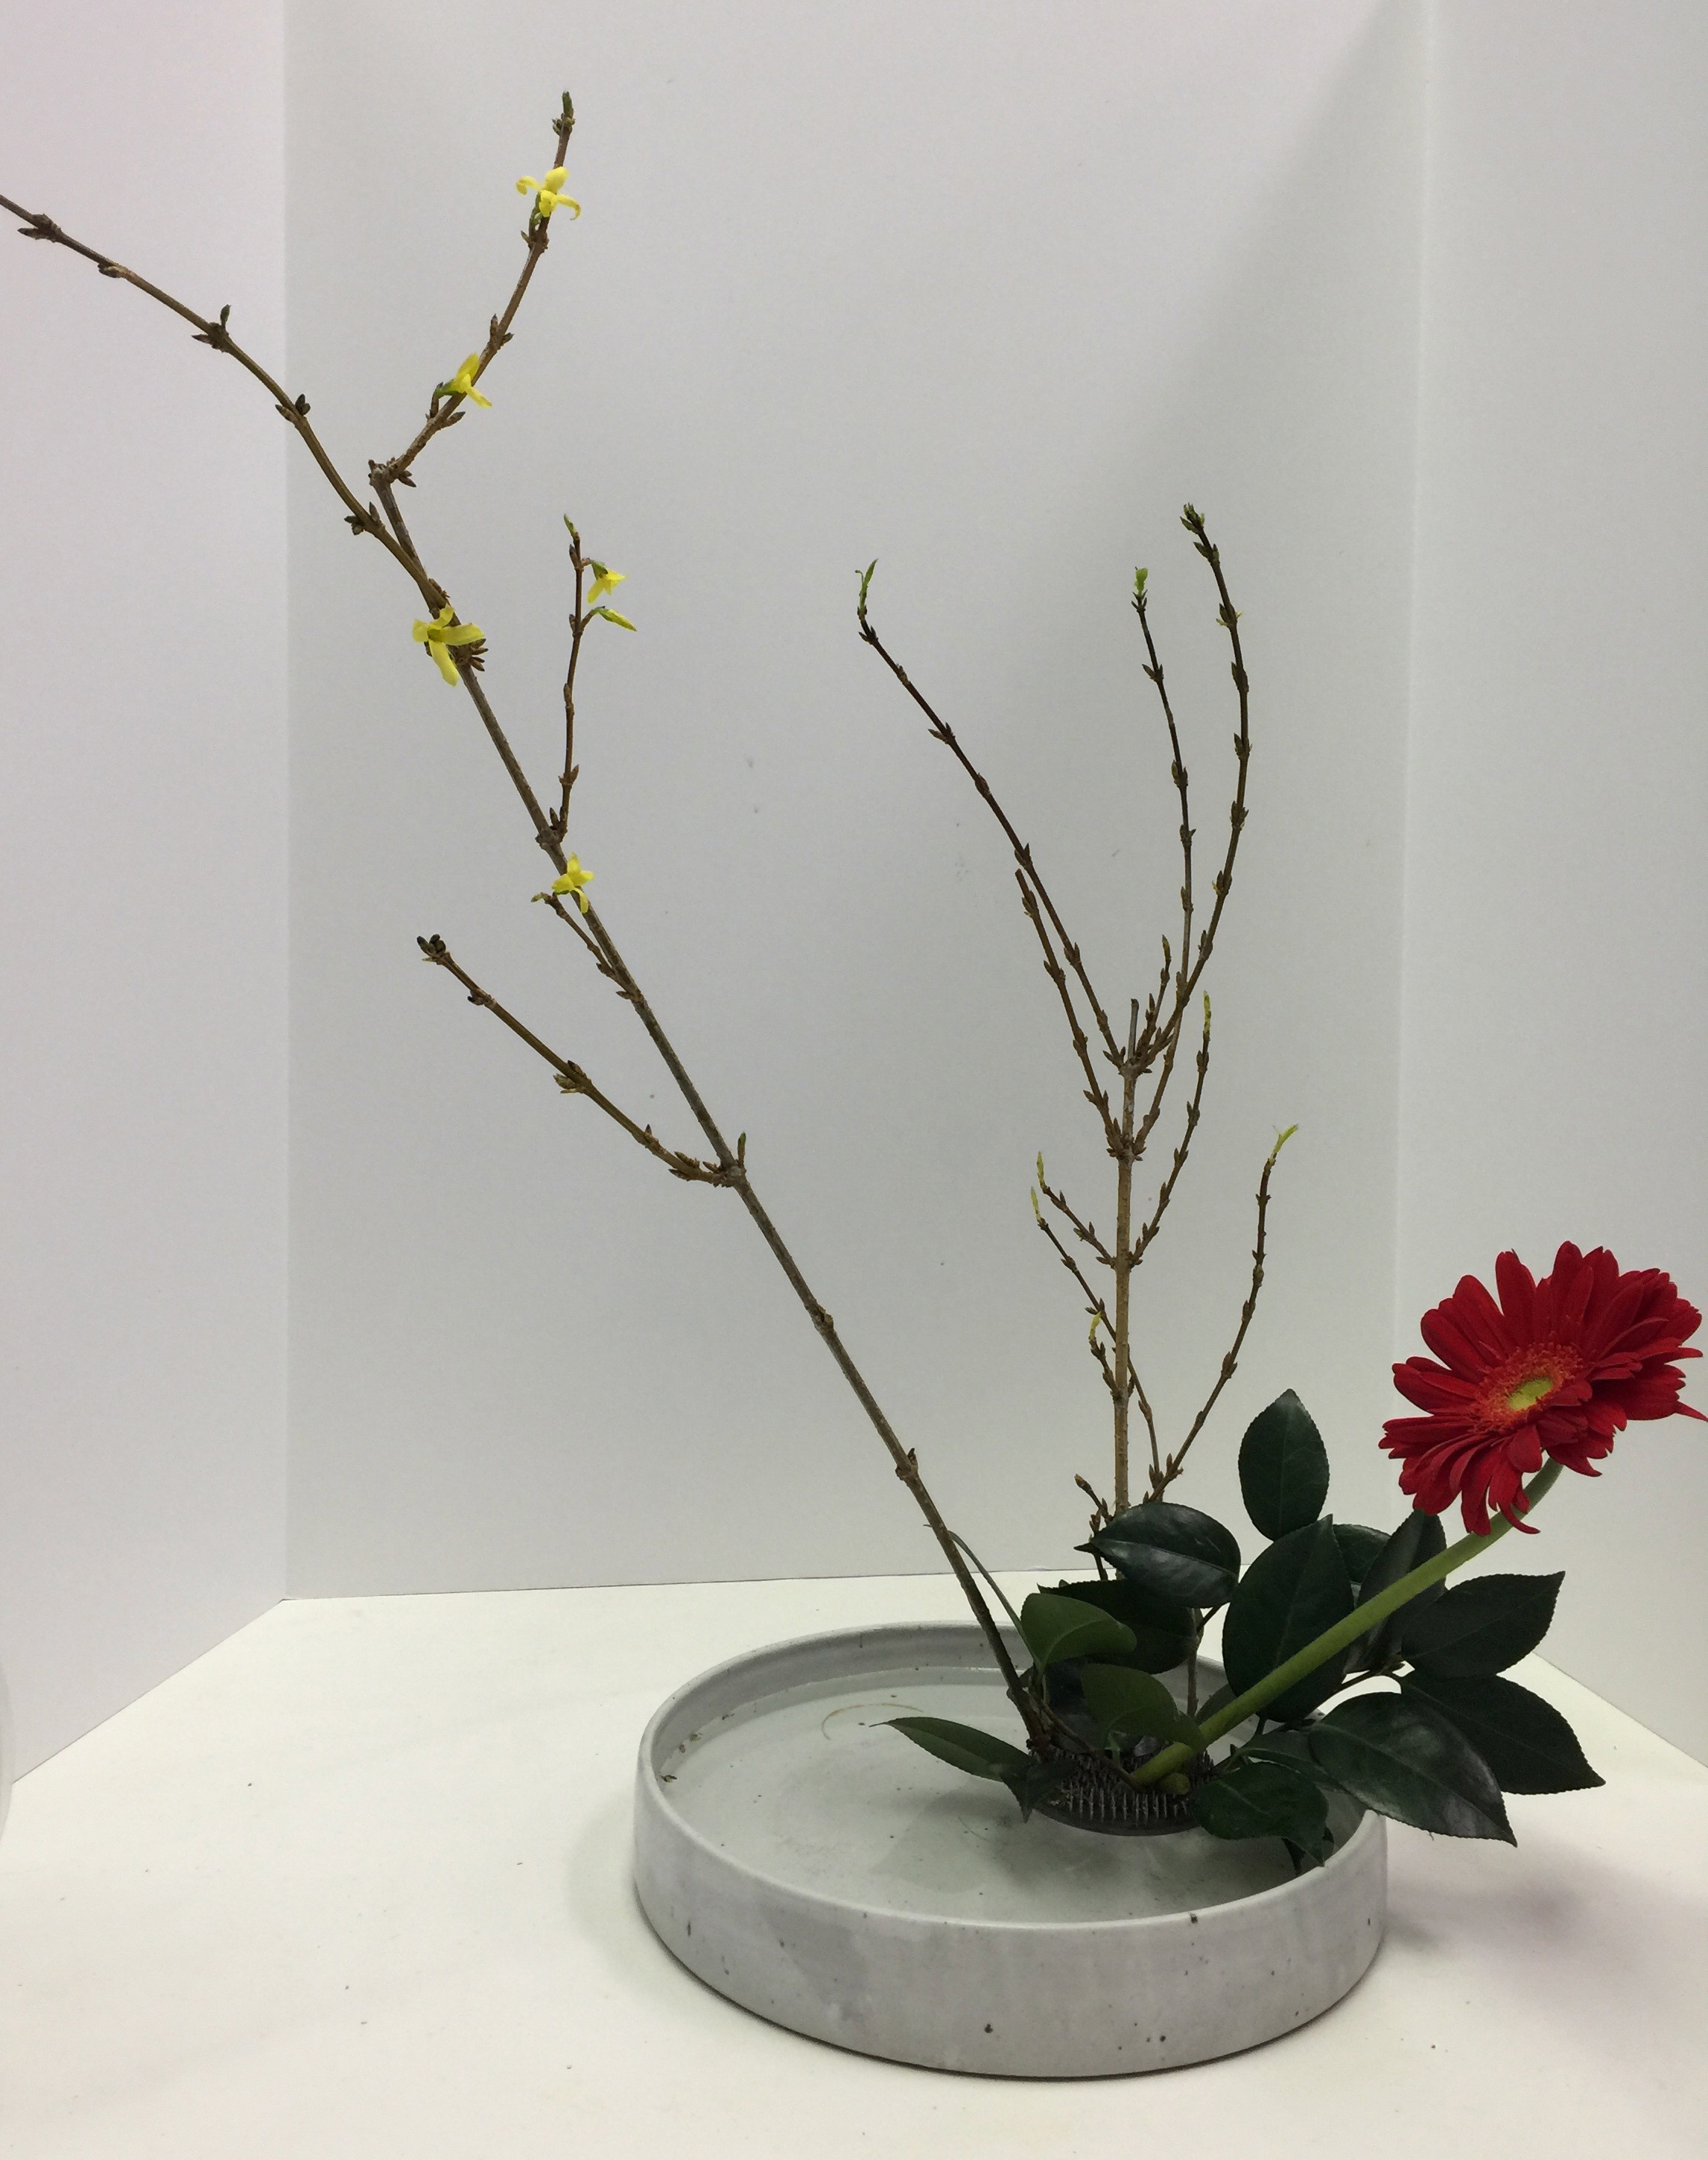 Book 1, Lesson 1, Page 1, Sogetsu School of Ikebana and Marilyn